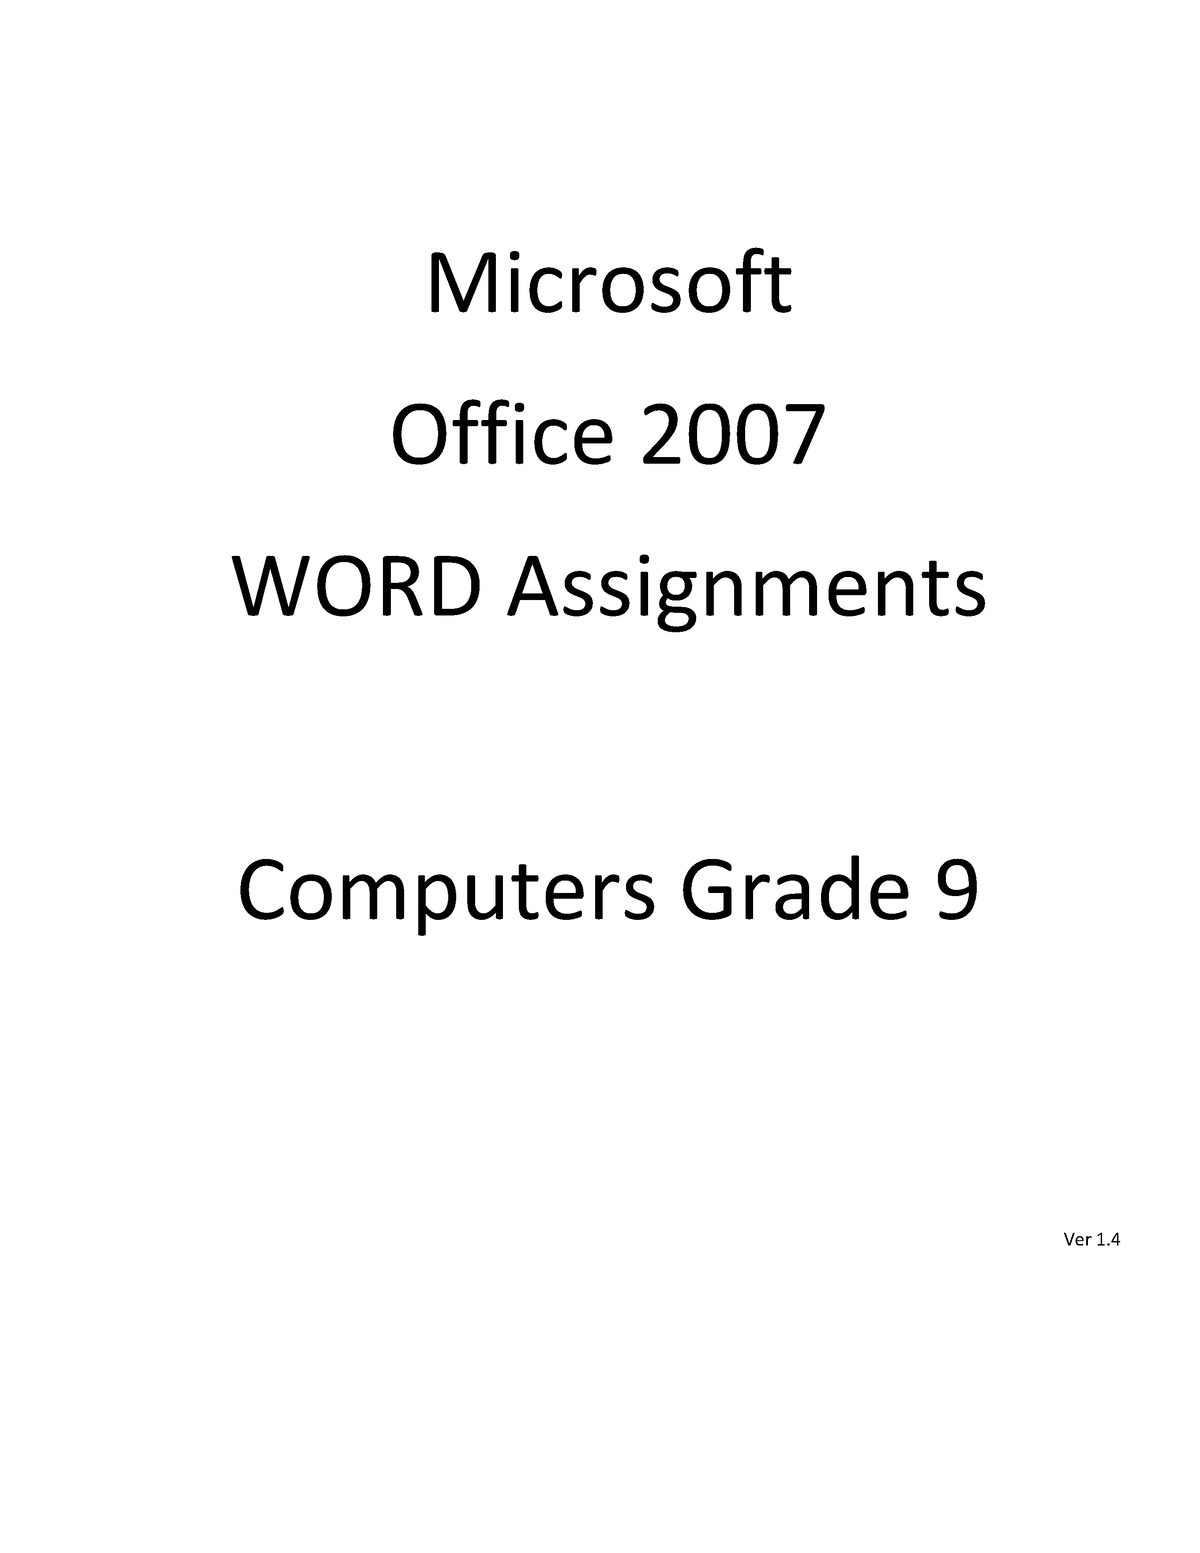 microsoft office 2007 word assignments computer grade 9